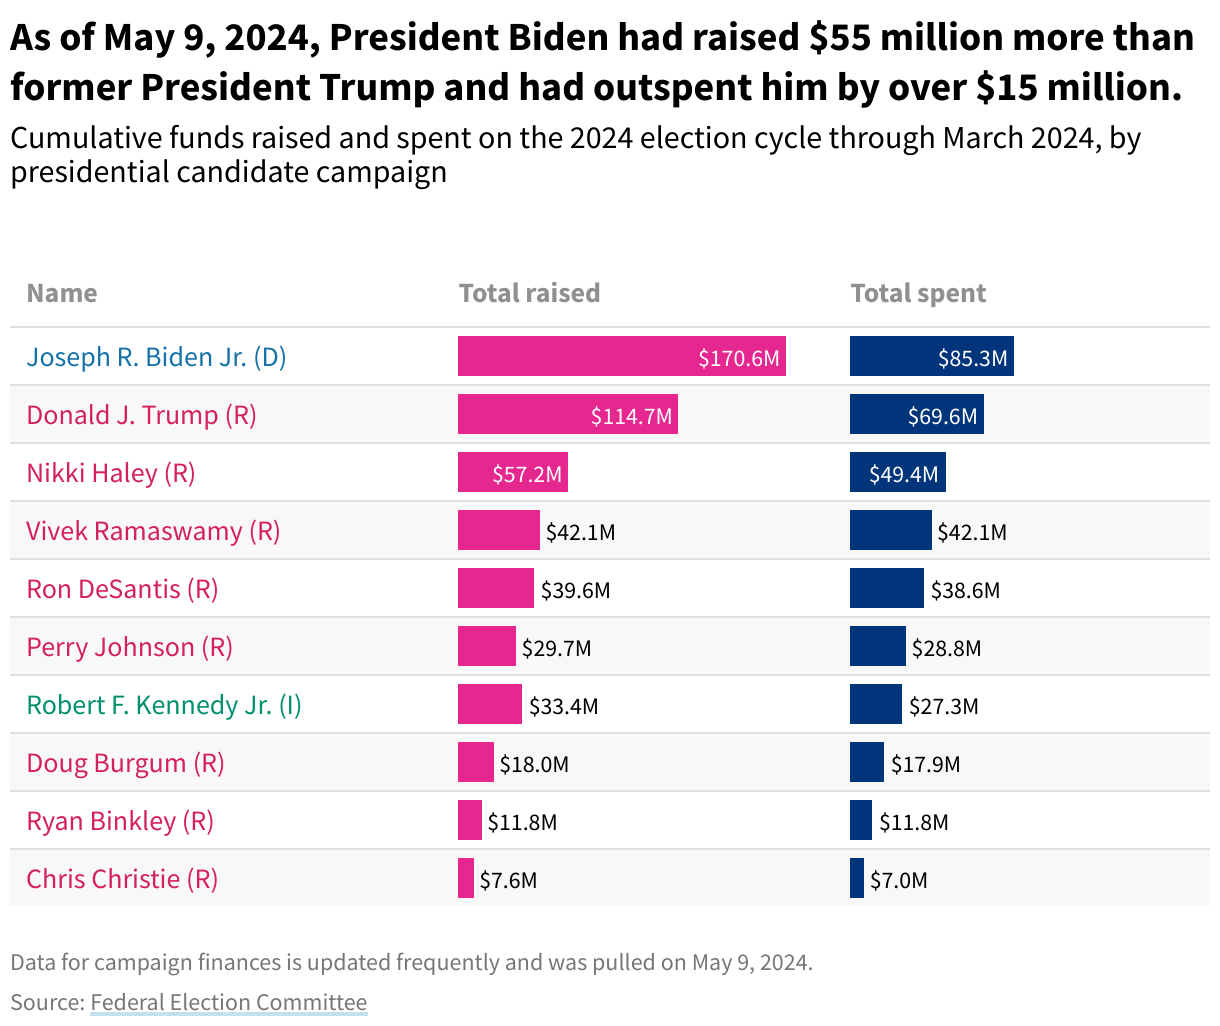 A table showing how much 10 of the 2024 presidential candidates have raised and spent (selected based on the rank of total funds raised as of May 9, 2024).